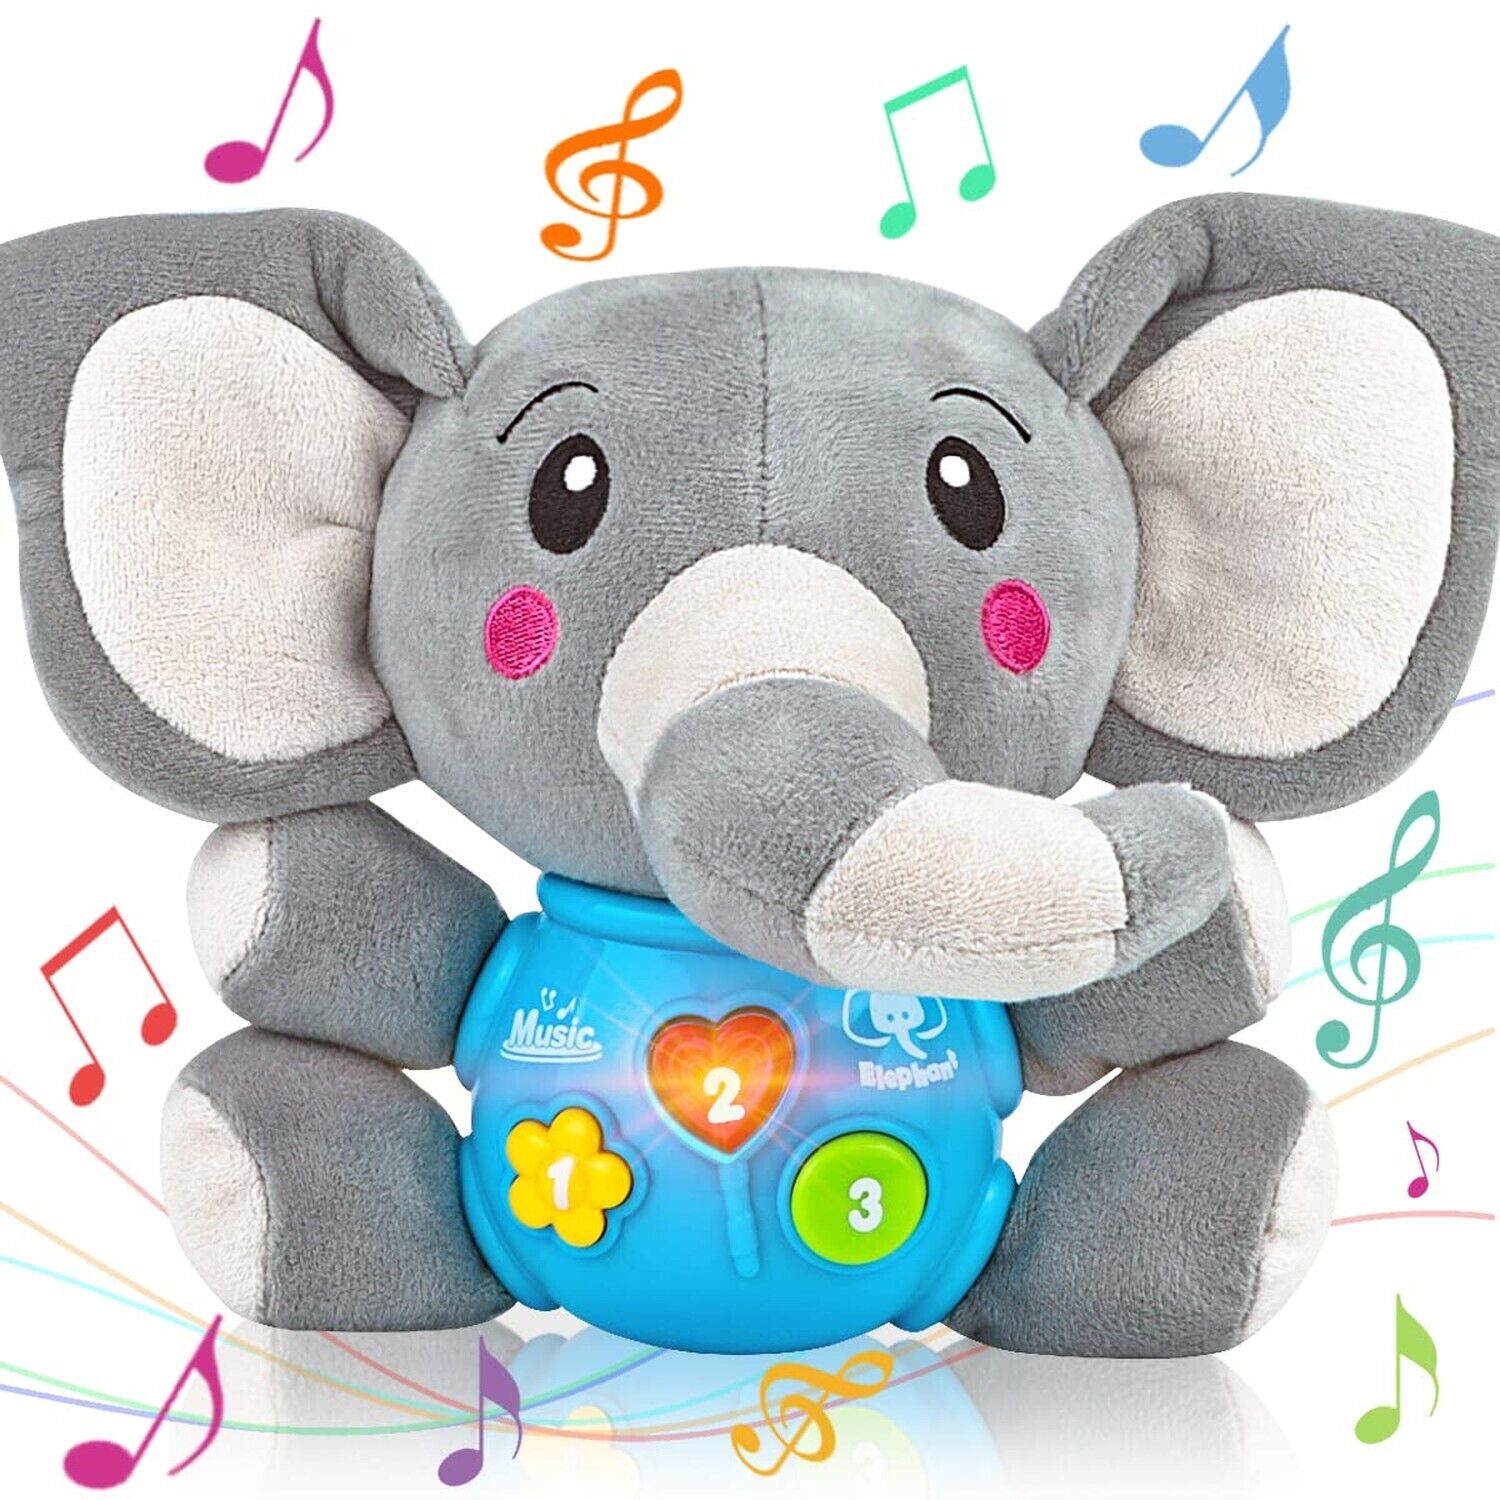 Plush Elephant Musical Baby Toy for 0-36 Months